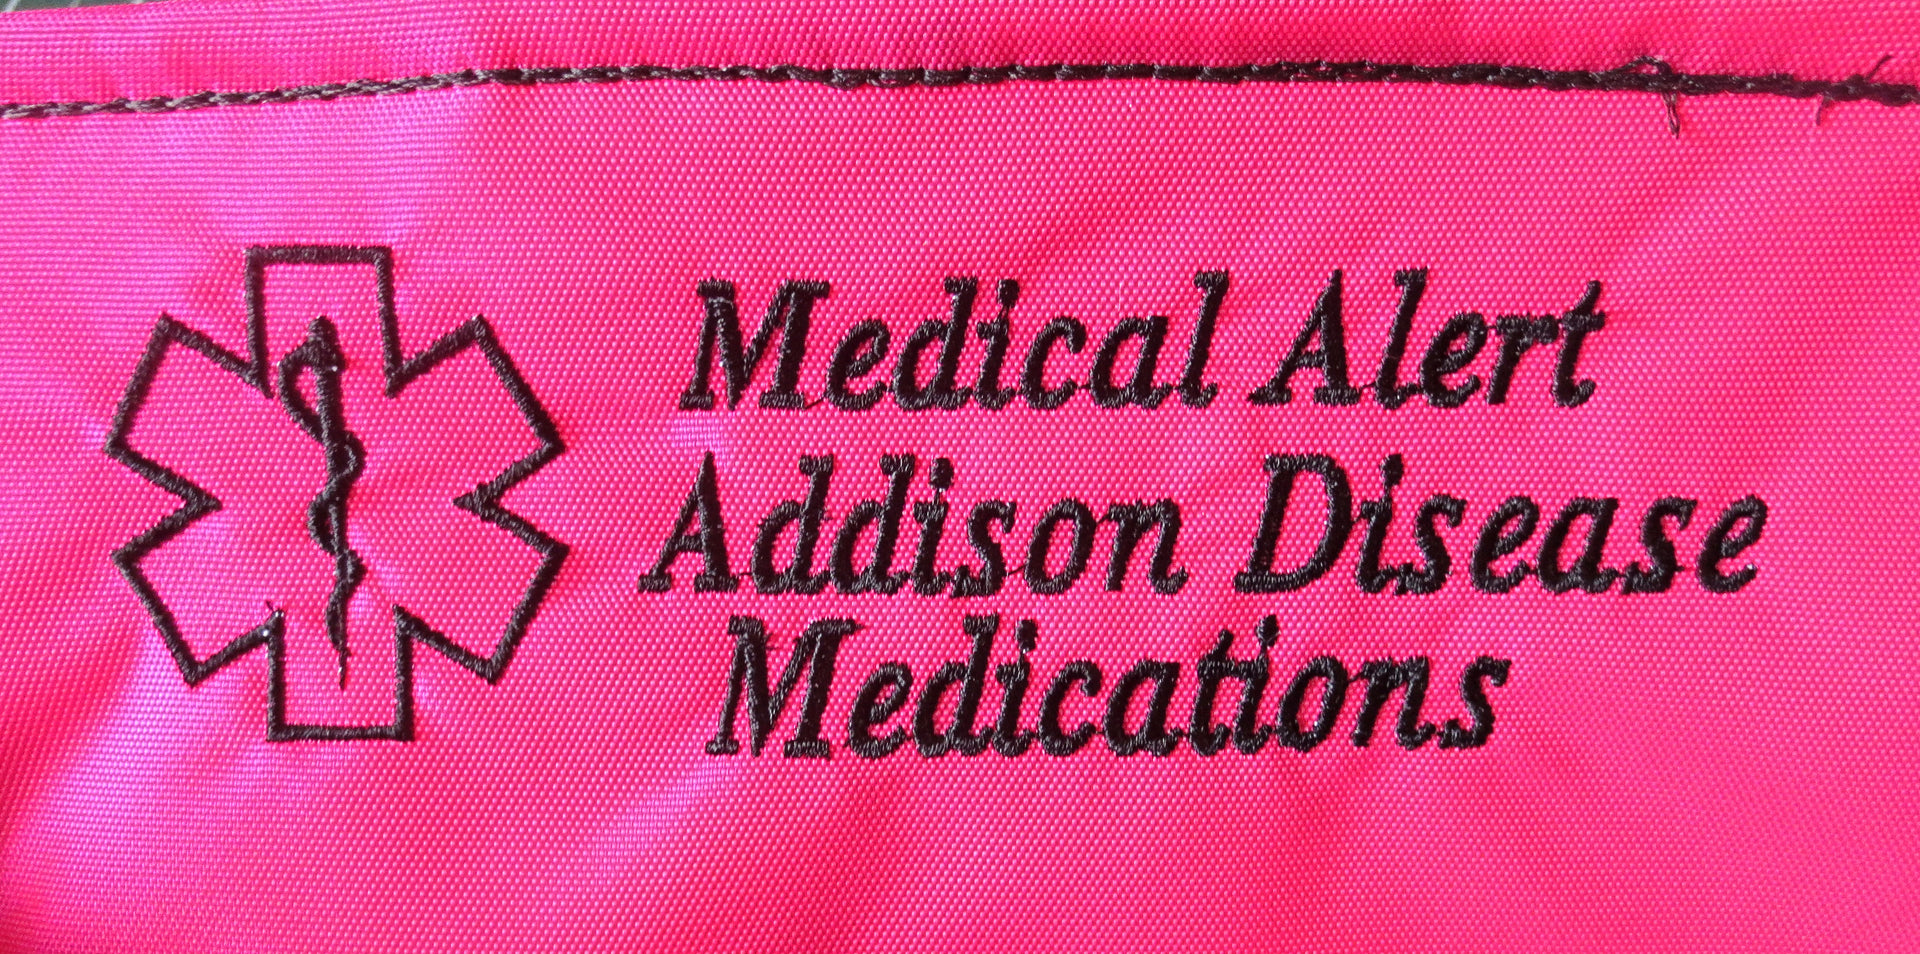 adrenal insufficiency toss in your bag zippered medical insulated case with alert label